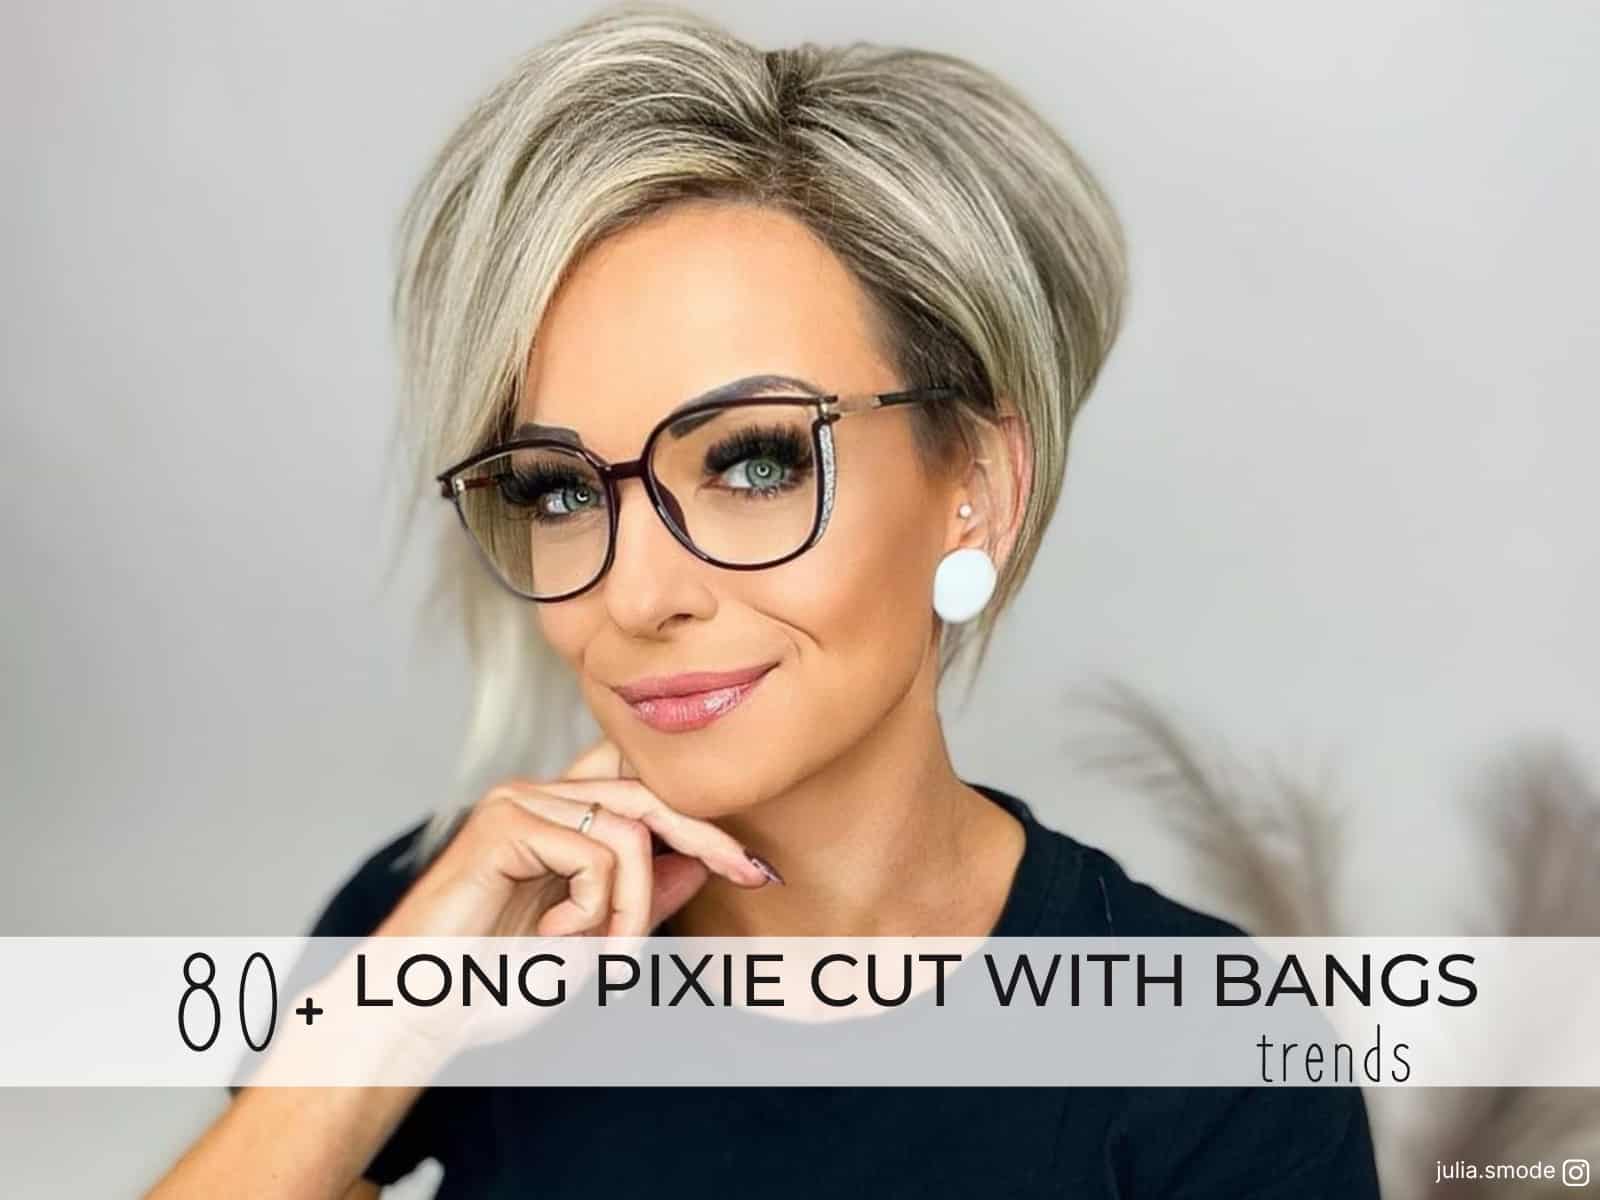 80+Stylish Long Pixie Cut With Bangs Trends